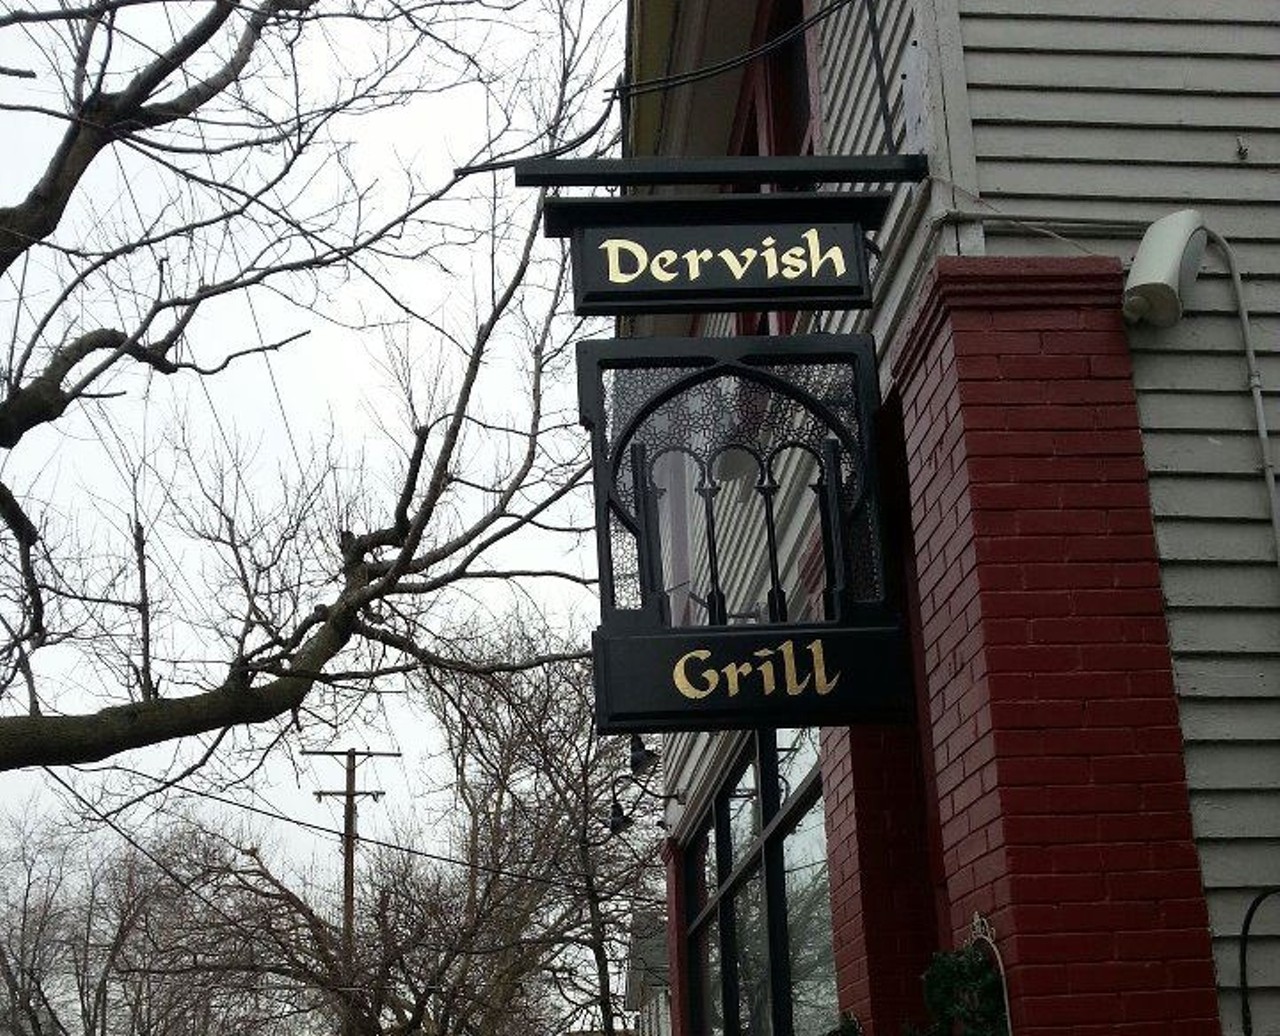 At this Tremont gem, the Turkish version of this Greek classic is called a Doner Kebap. Seasoned lamb and beef are vertically cooked and layered to perfection before being stuffed inside a warm pita. Dervish Grill is located at 2502 Professor Ave, Cleveland.